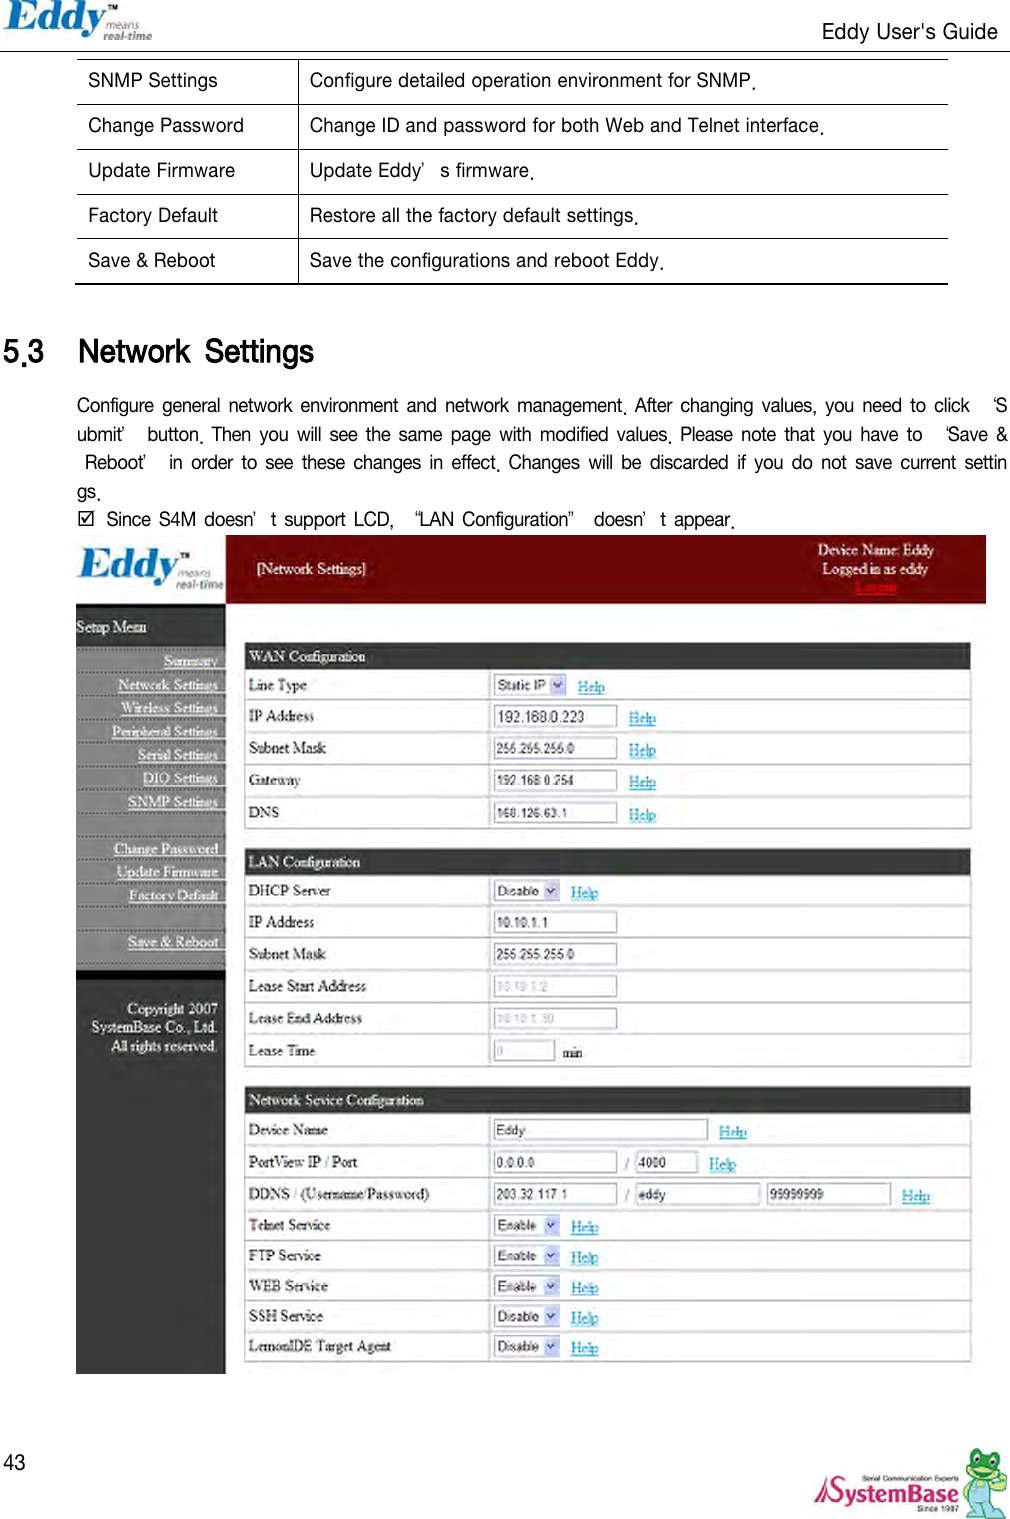                                                                   Eddy User&apos;s Guide   43 SNMP Settings Configure detailed operation environment for SNMP. Change Password Change ID and password for both Web and Telnet interface. Update Firmware Update Eddy’s firmware. Factory Default Restore all the factory default settings. Save &amp; Reboot Save the configurations and reboot Eddy.  5.3 Network  Settings Configure general network environment  and network  management. After changing  values,  you need to  click  ‘Submit’ button.  Then  you will  see the same  page with modified values. Please  note that  you have  to  ‘Save  &amp; Reboot’ in order  to  see  these changes in effect. Changes will be  discarded  if  you do  not save  current settings.  Since S4M doesn’t support LCD,  ‚LAN Configuration‛ doesn’t appear.    